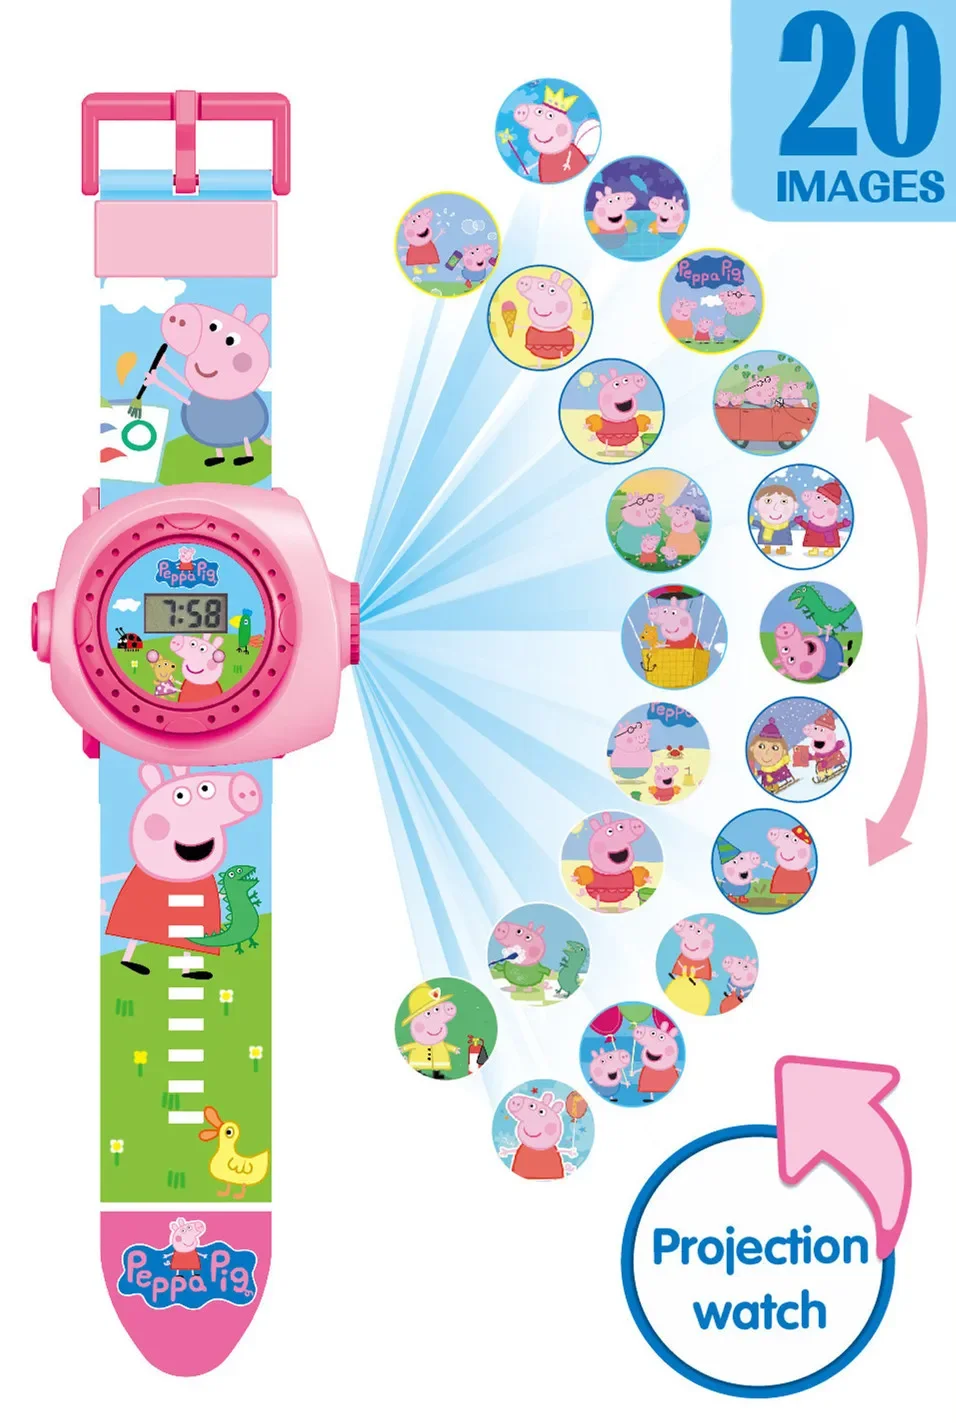 

New Arrival Peppa Pig Cartoon 3D Projection Watch Girl Anime Cute Electronic Watch Action Doll Toy Children's Birthday Gift